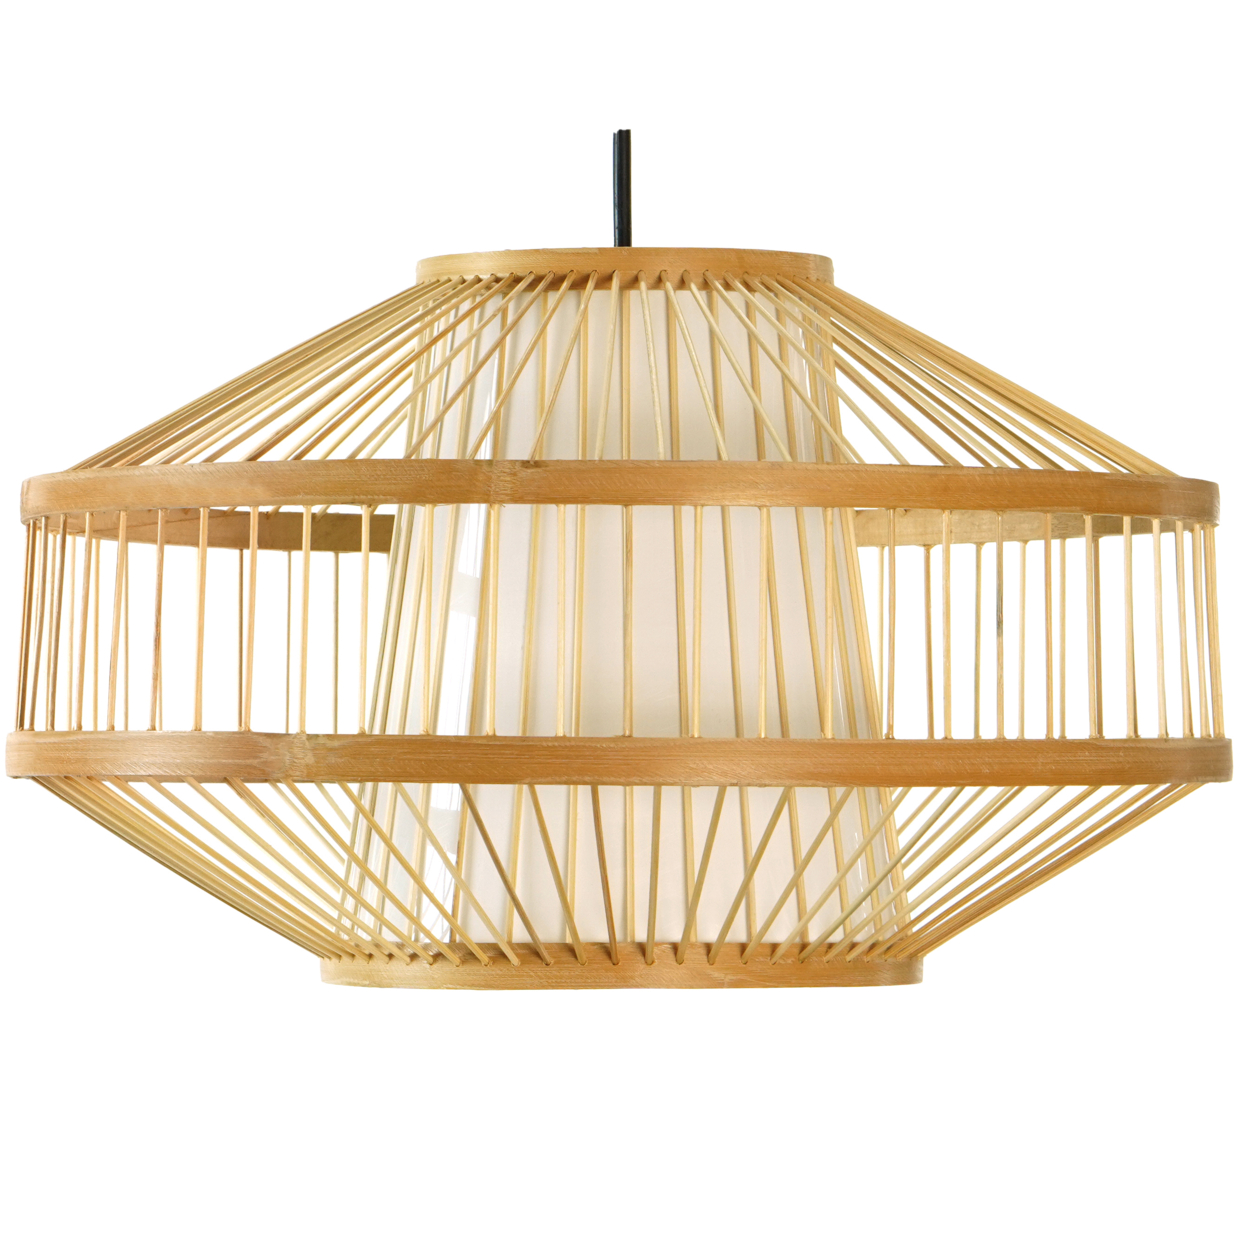 Modern Bamboo Lantern Pendant Lamp Hanging Light Shade For Entryway And Living Room - Small